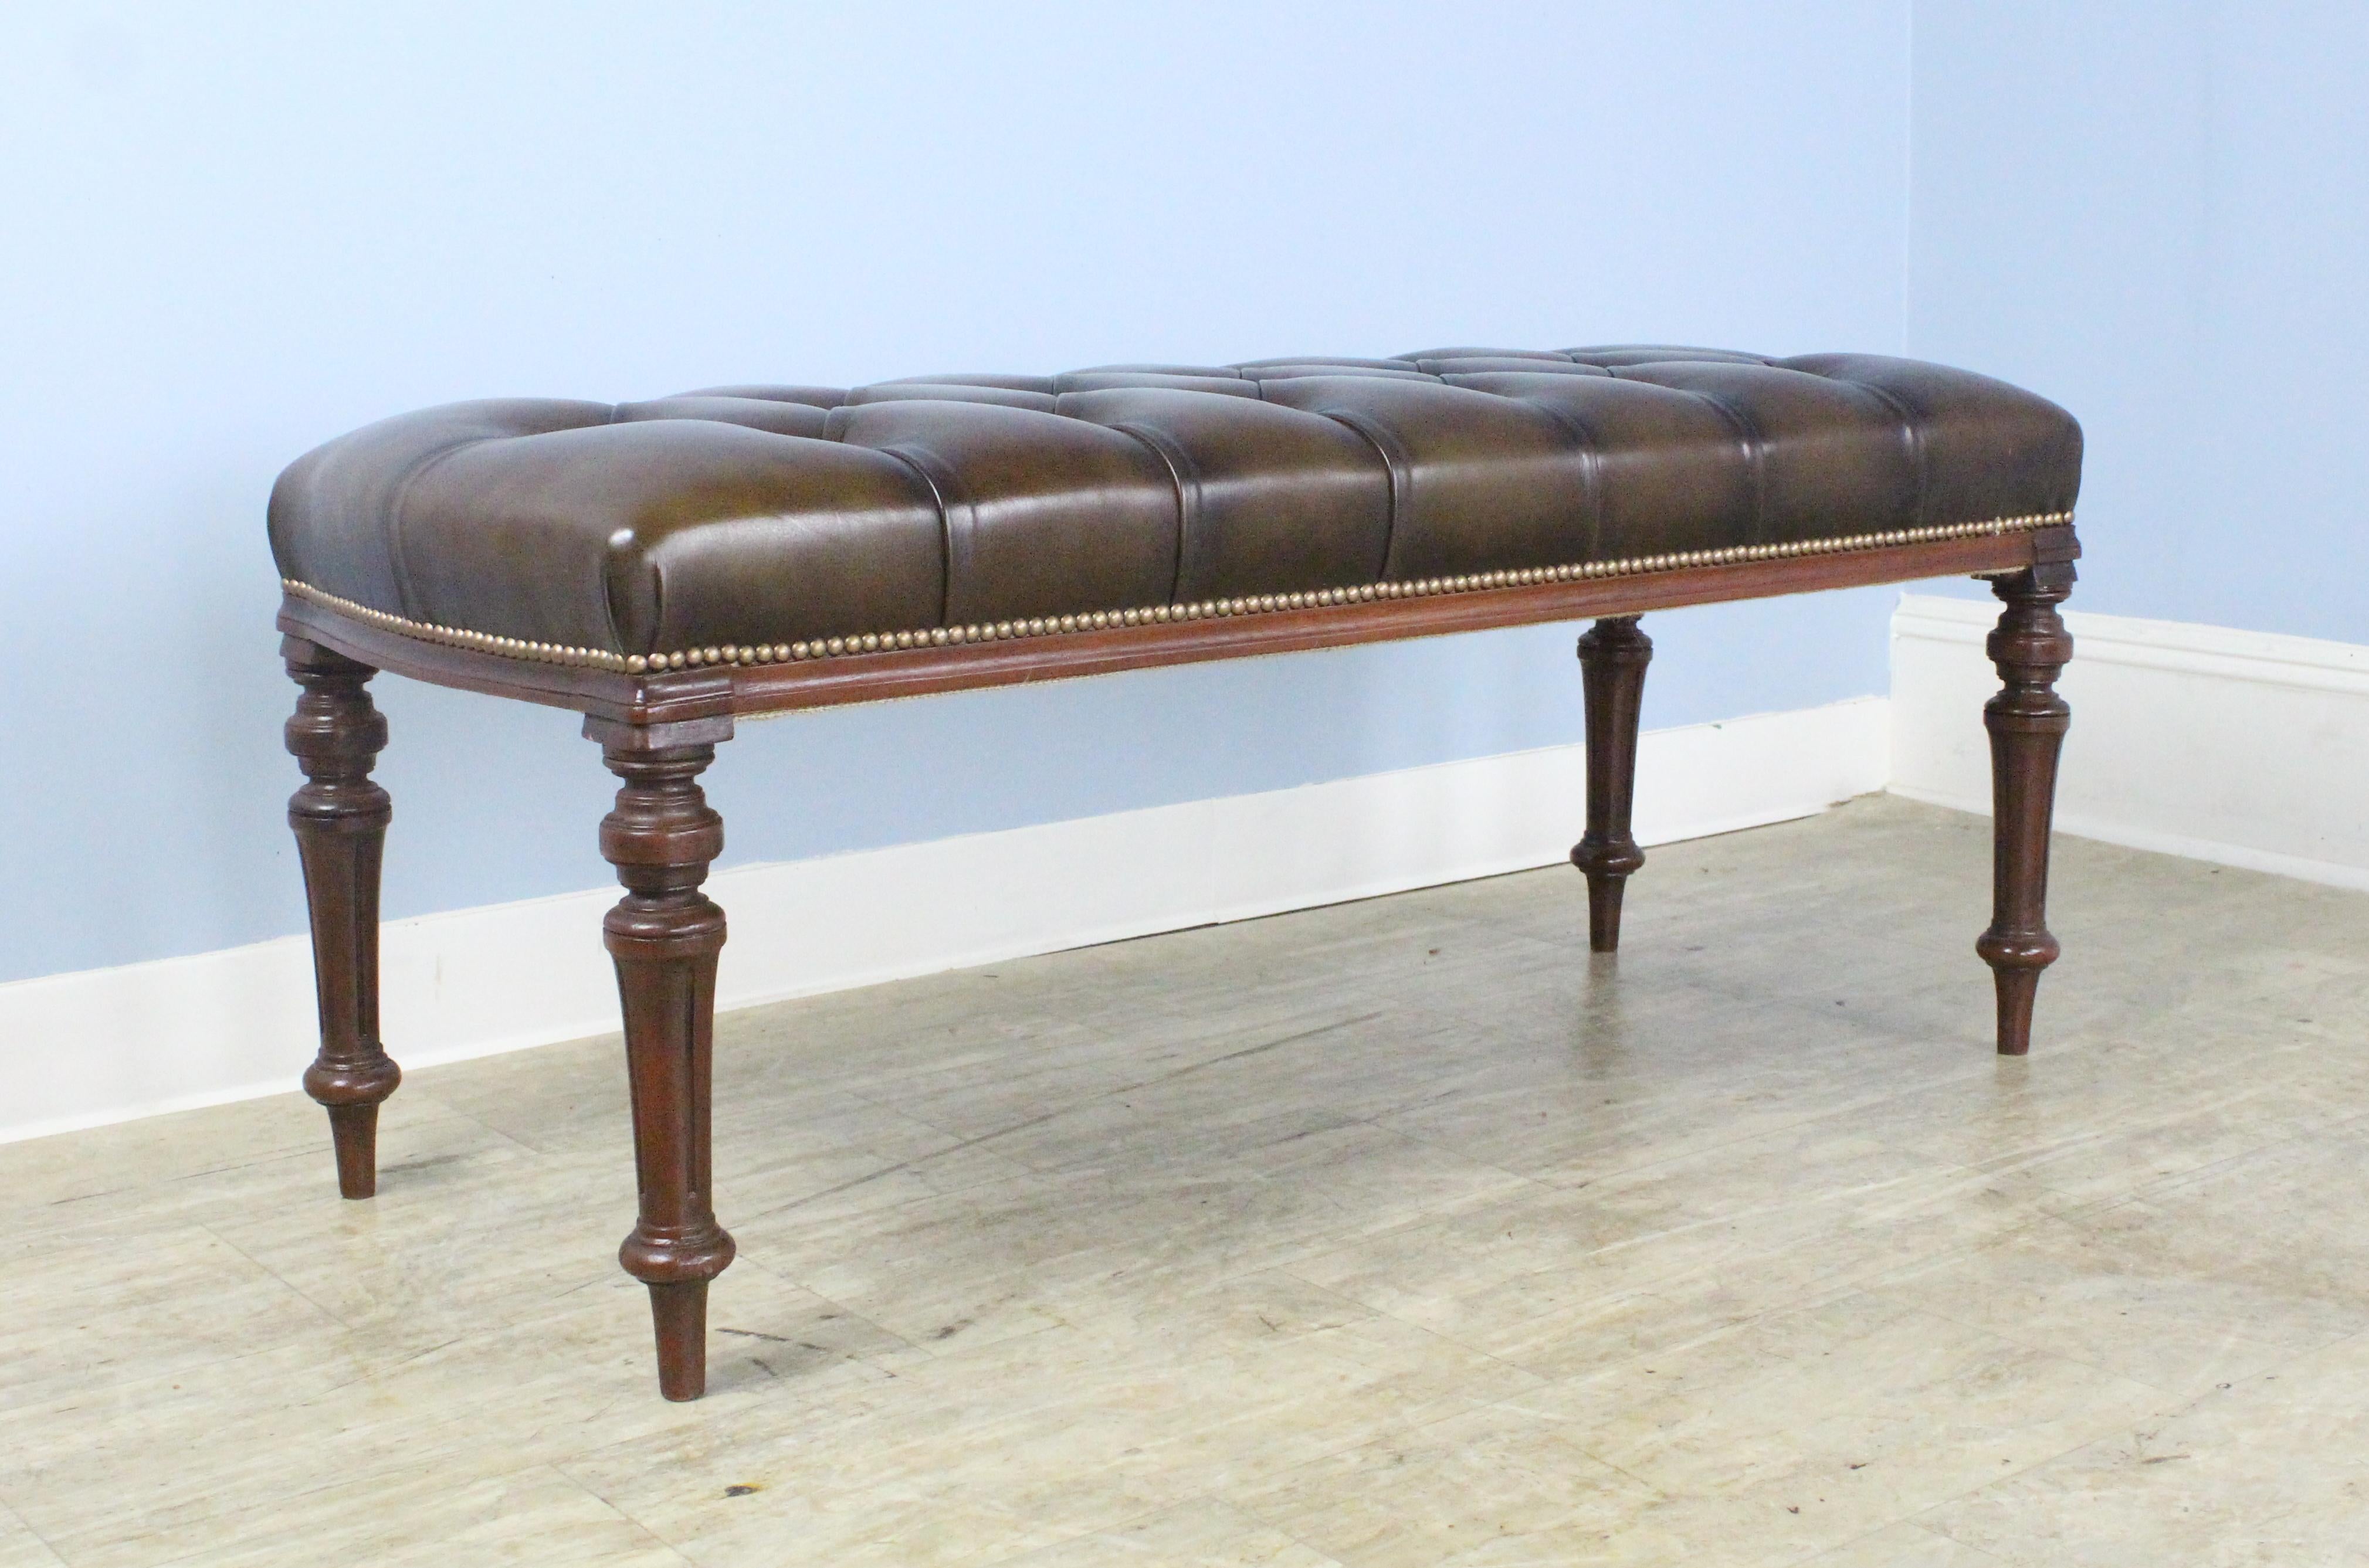 A handsome mahogany bench with turned legs, newly upholstered in tufted brown leather. The leather is in sparkling condition, with decorative rivets at the legs. Height is good for seating or as a coffee table, with or without a tray on top.